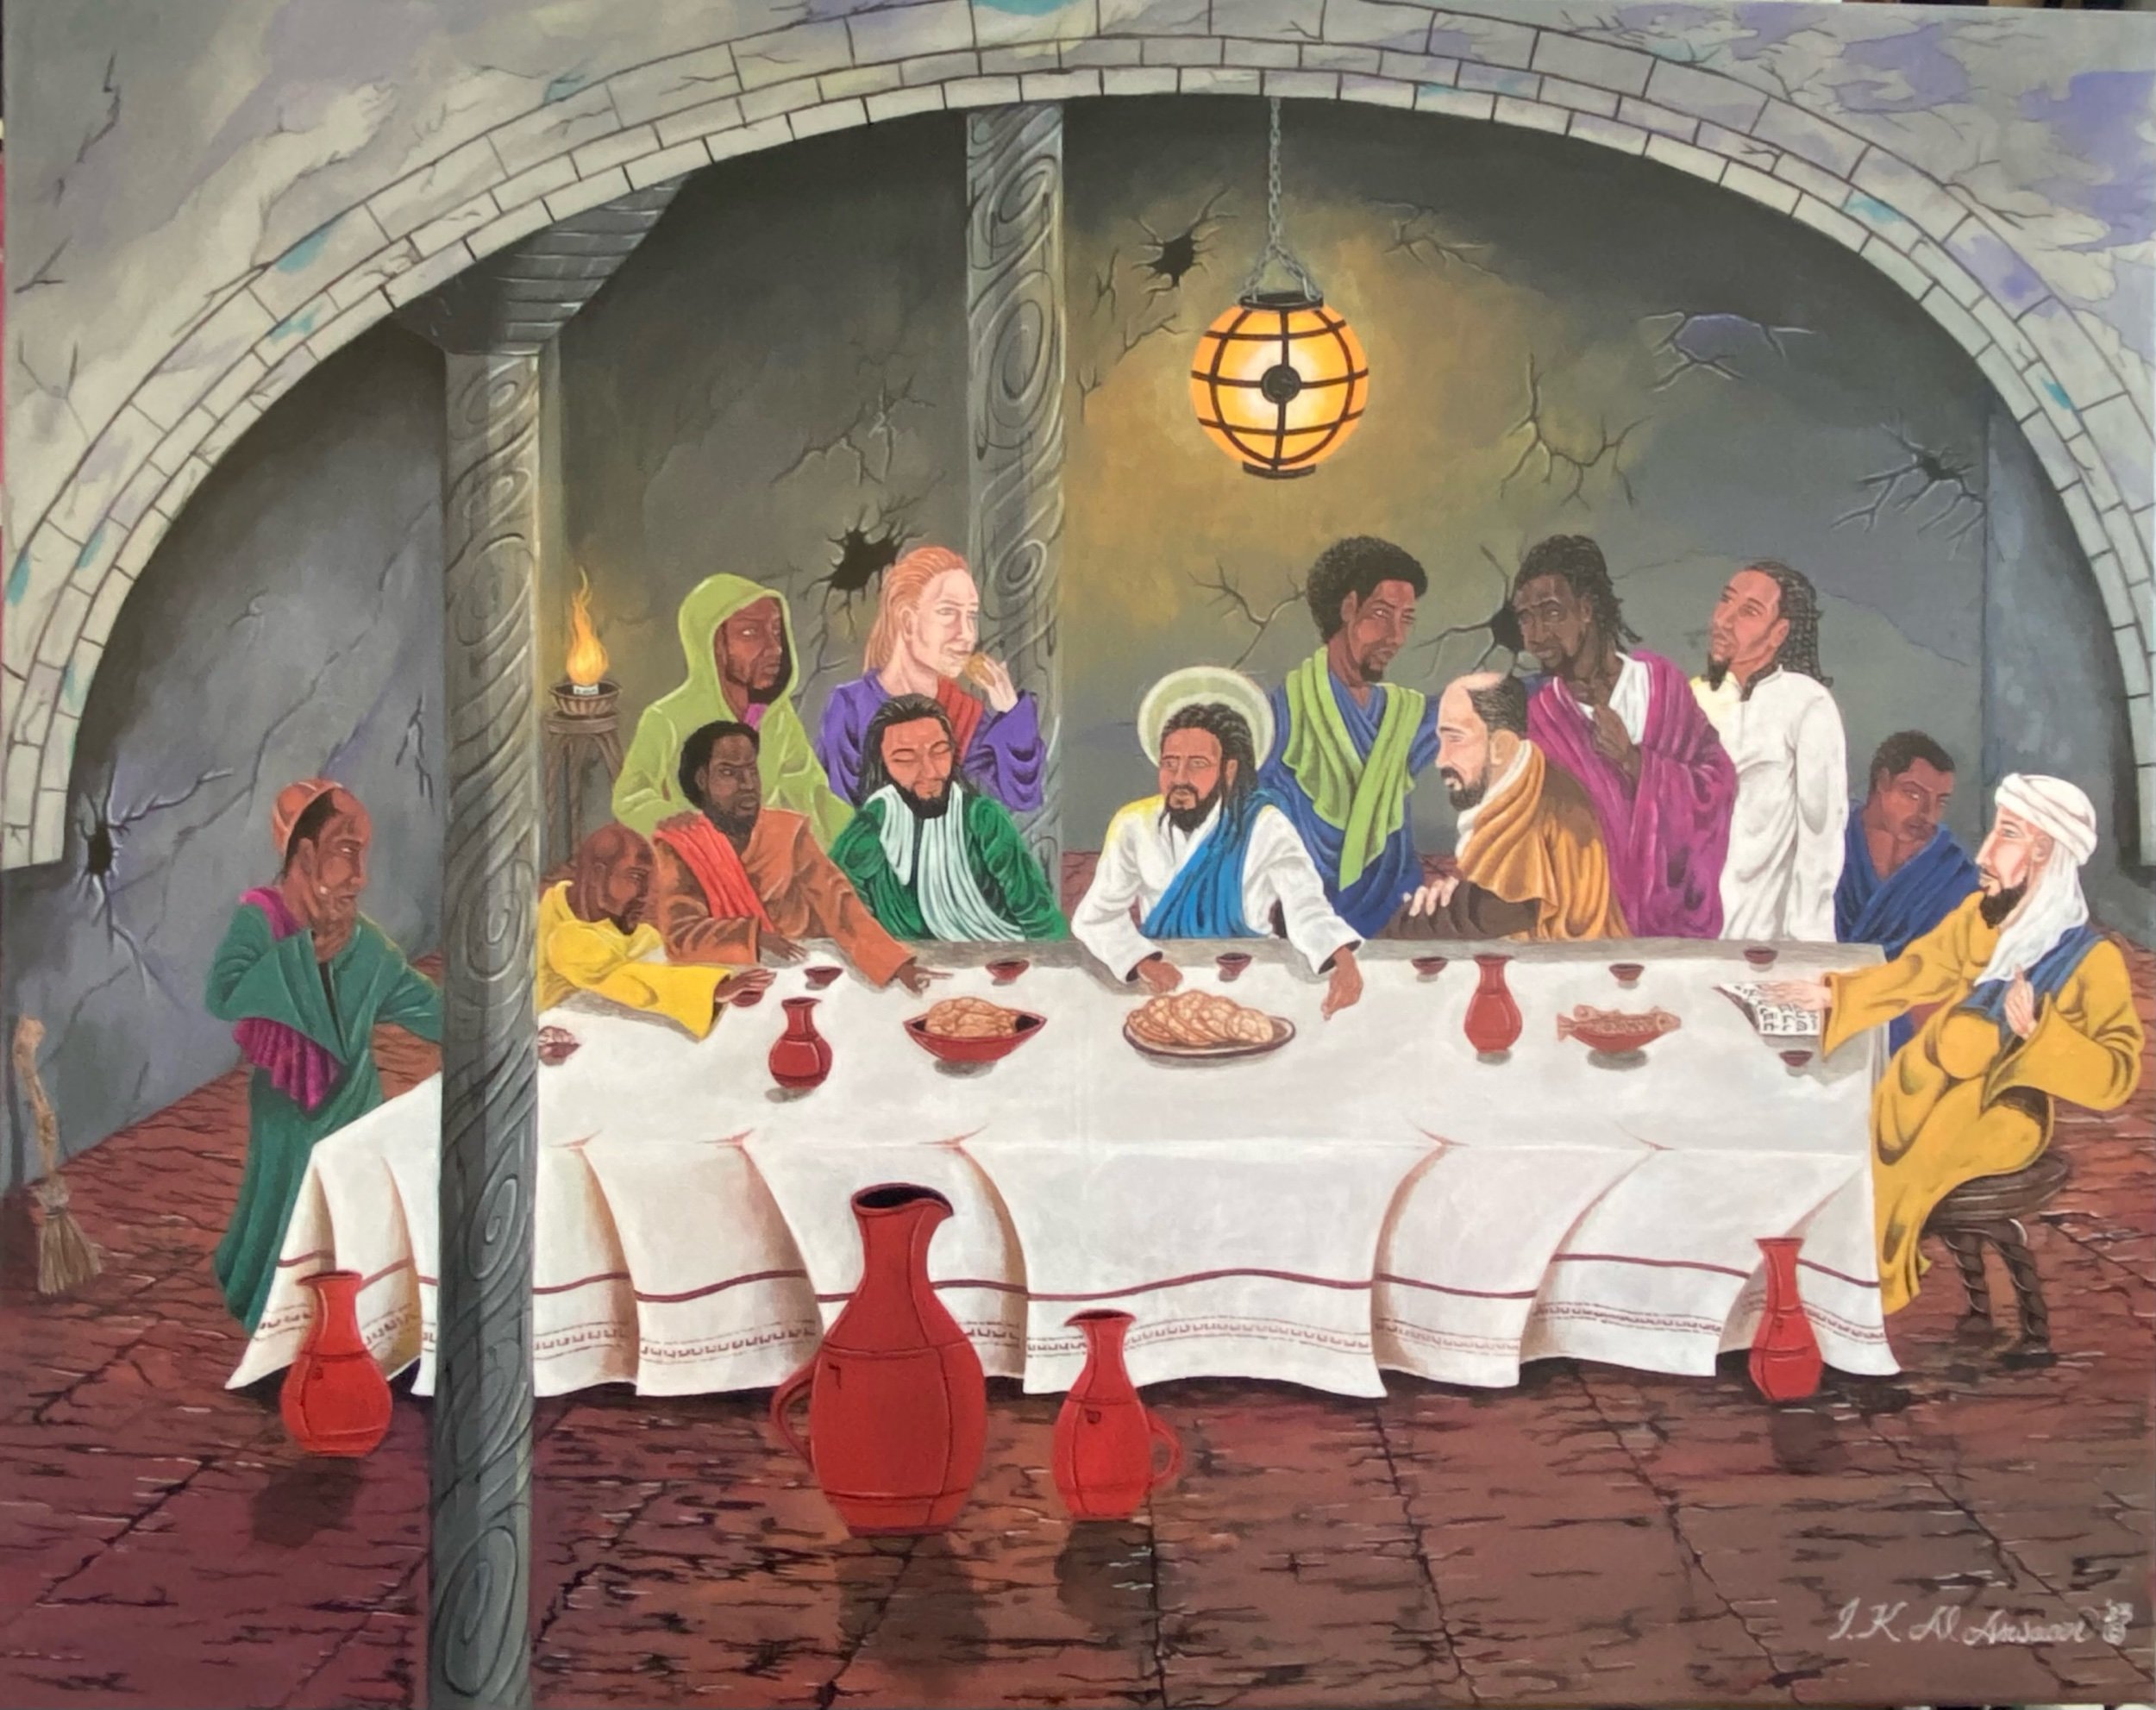 22. The Last Supper